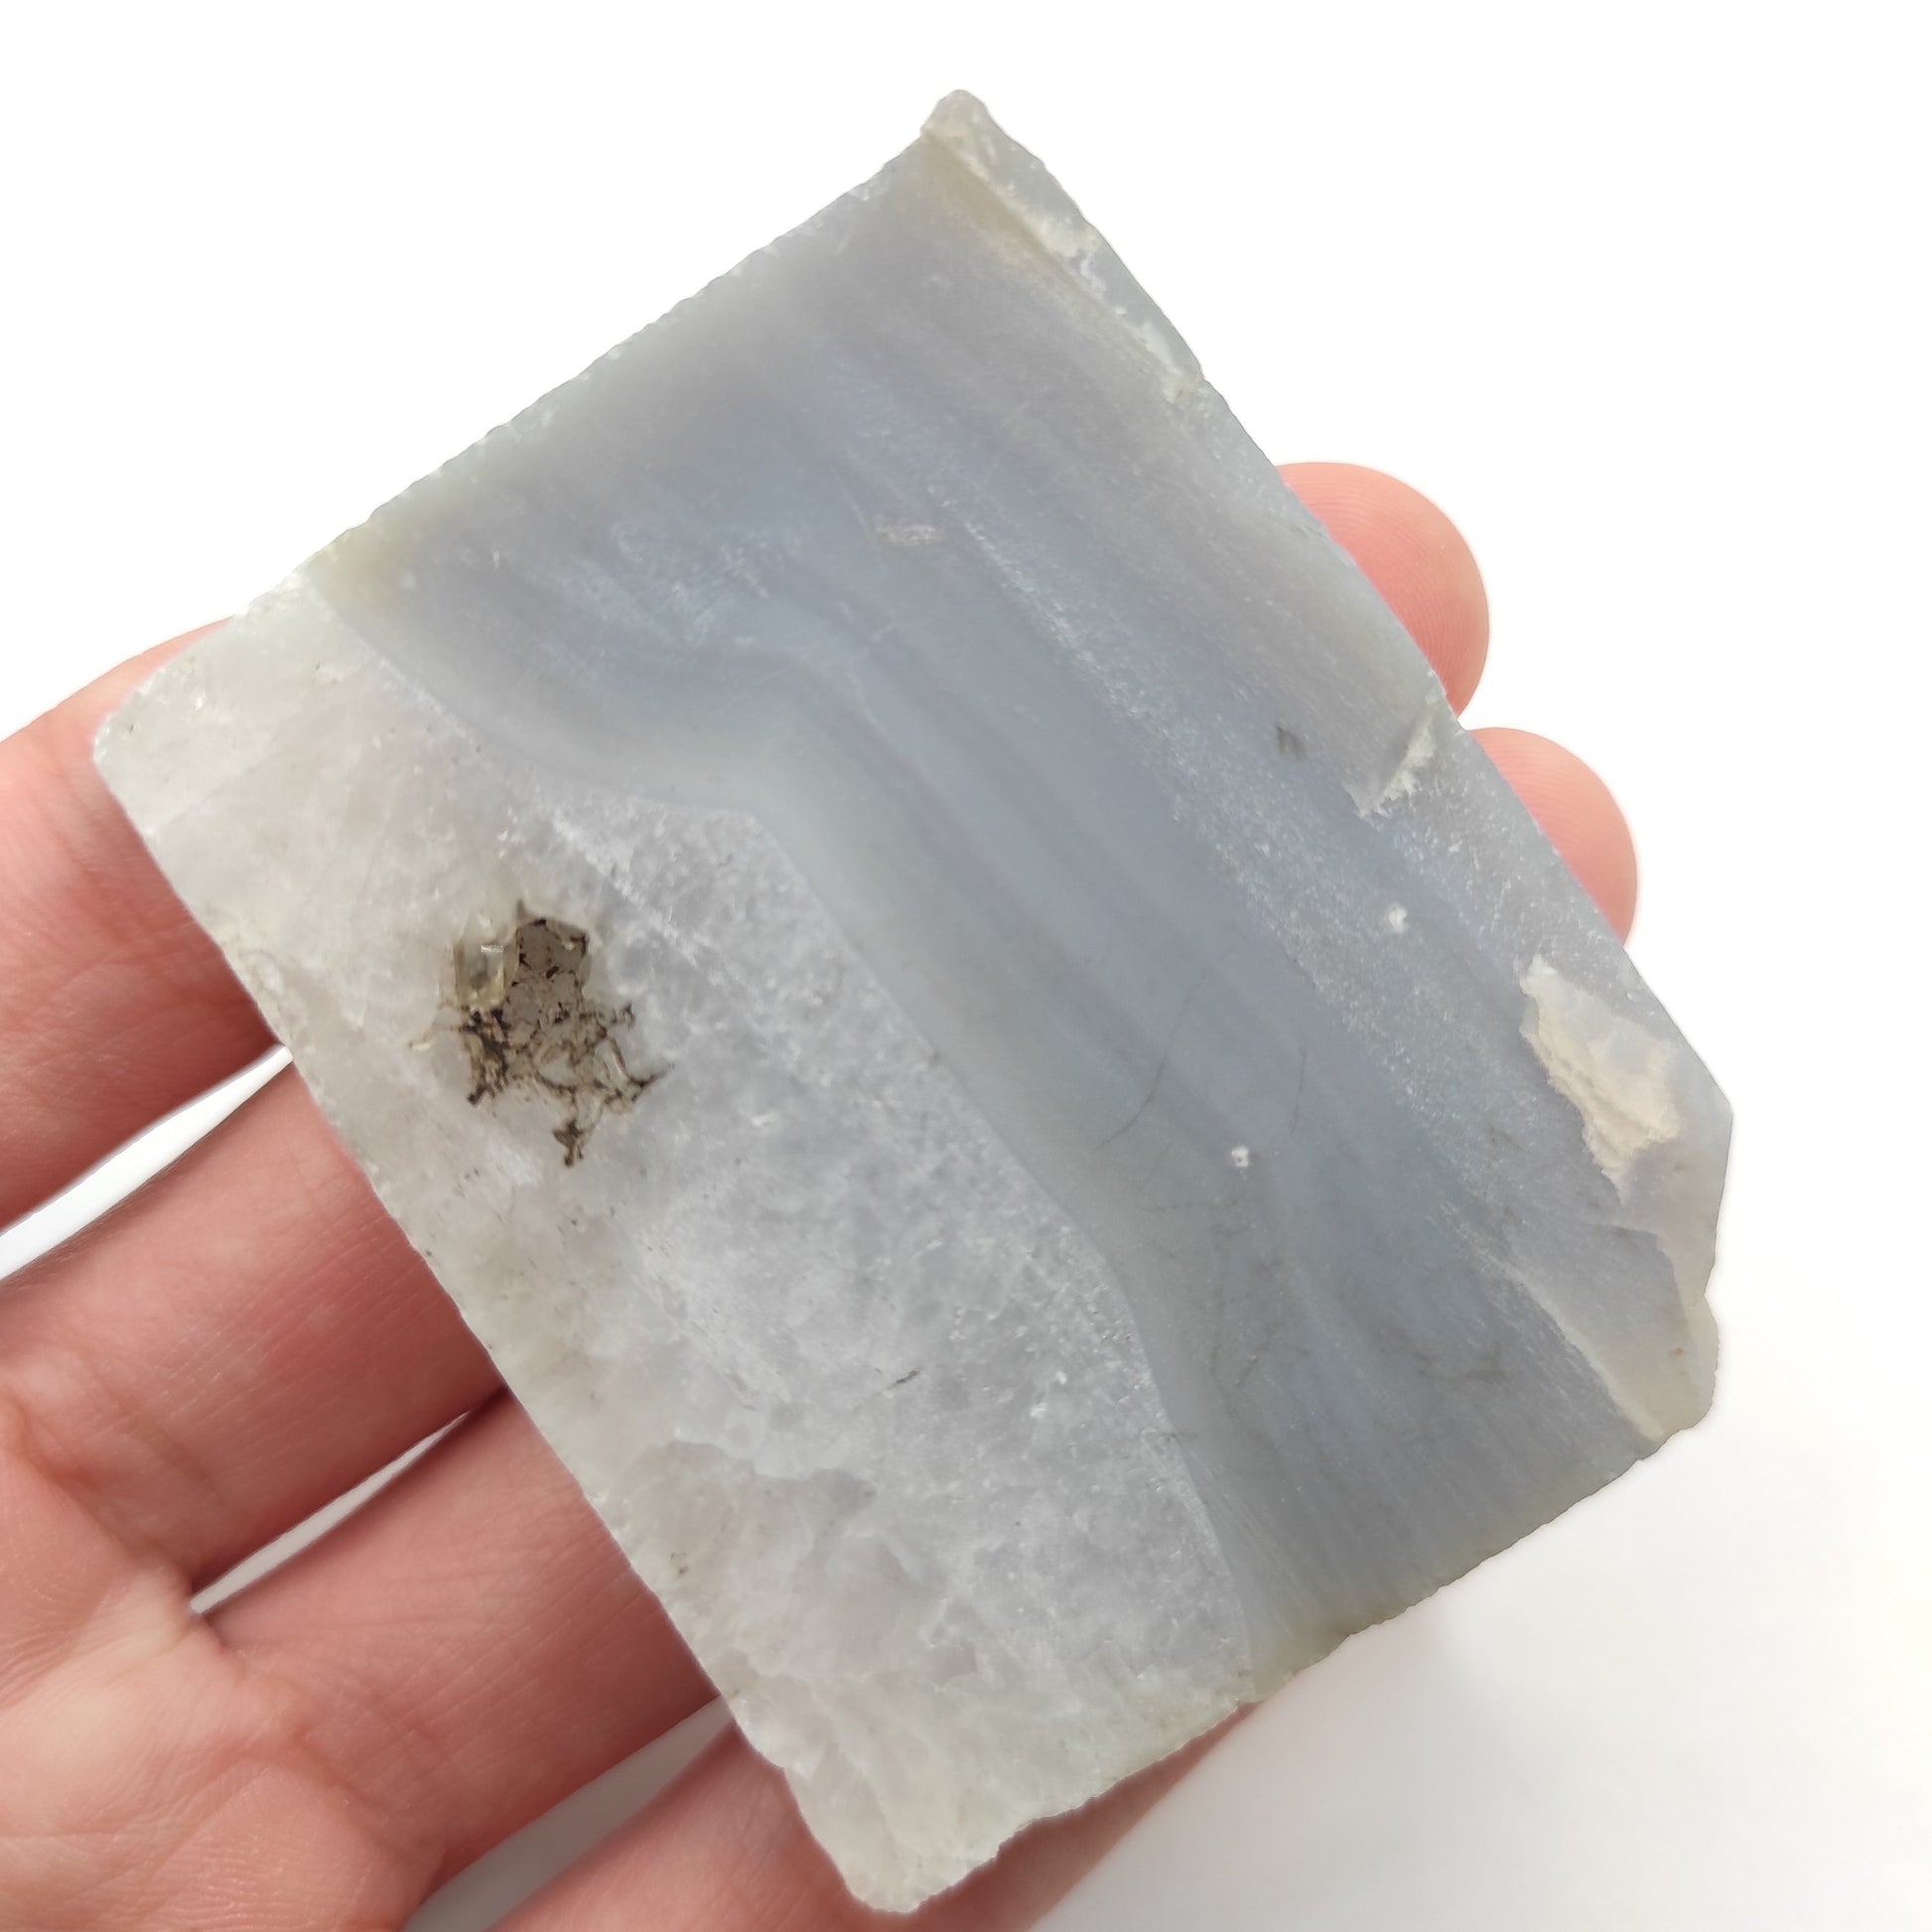 82g Agate Slab - Rough Grey Agate Slab for Lapidary - Raw Agate Slice for Polishing - Natural Grey Agate